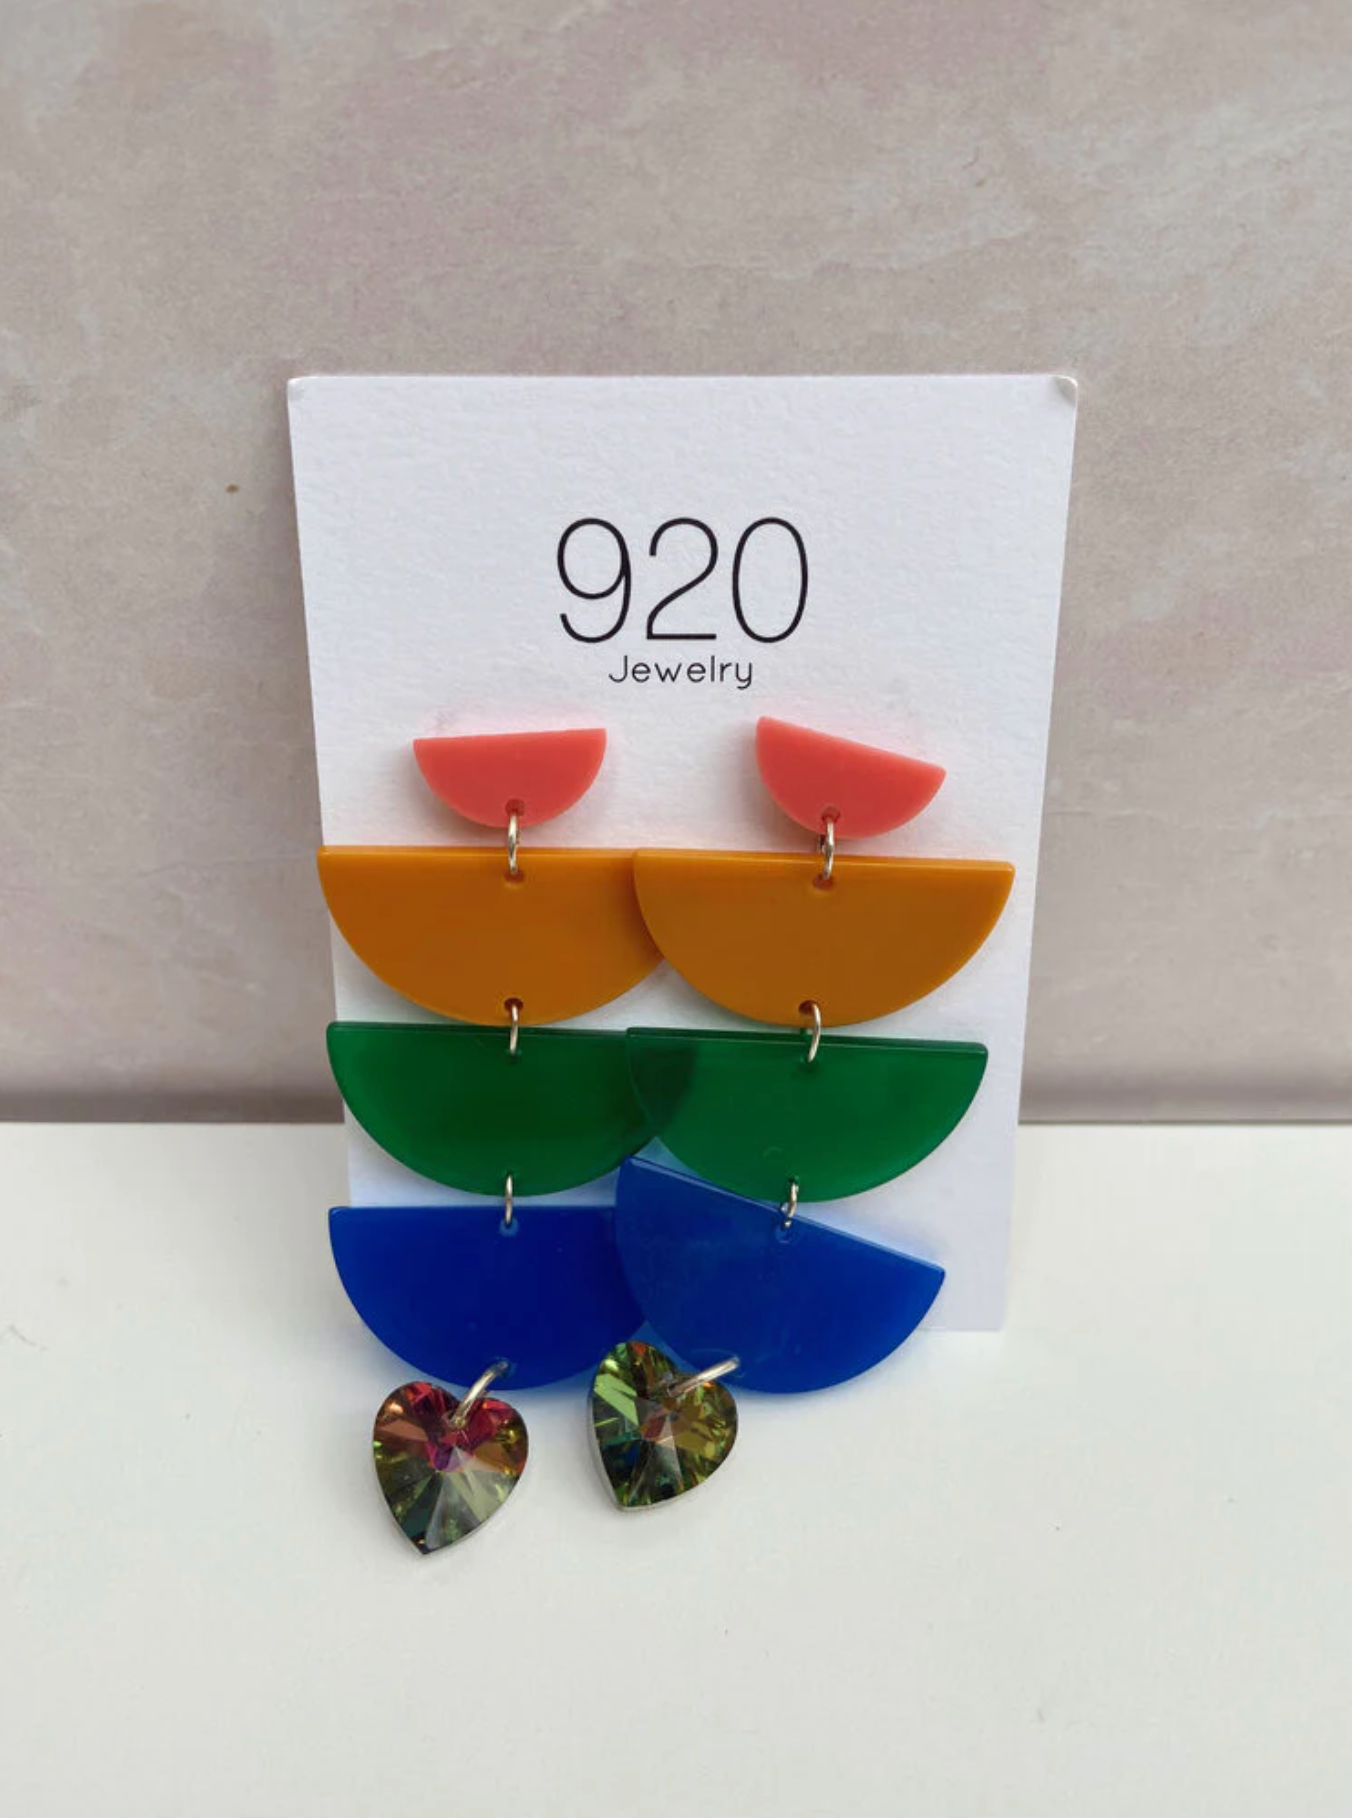 Resin dangly earrings made out of geometric shapes in bright colors made by 920 JEWELRY